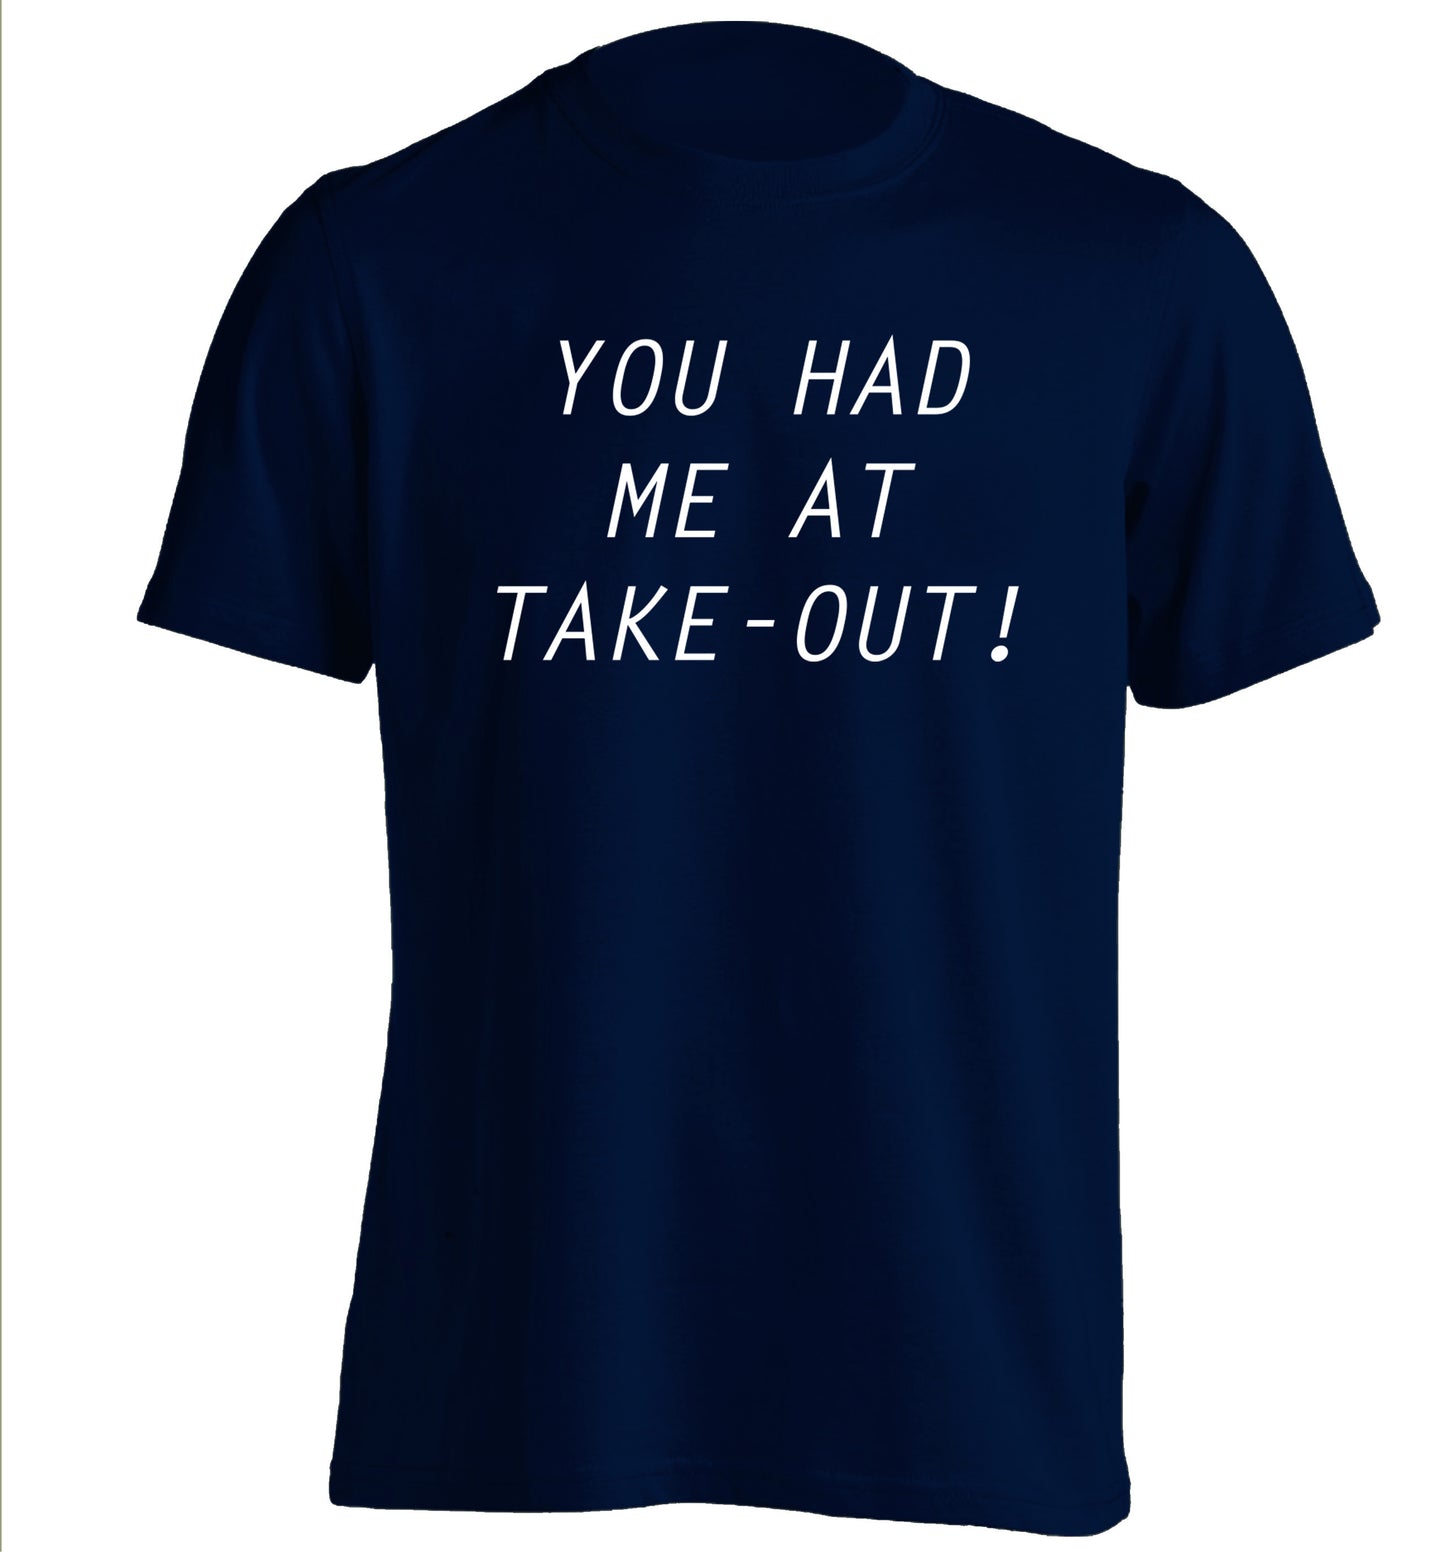 You had me at take-out adults unisex navy Tshirt 2XL